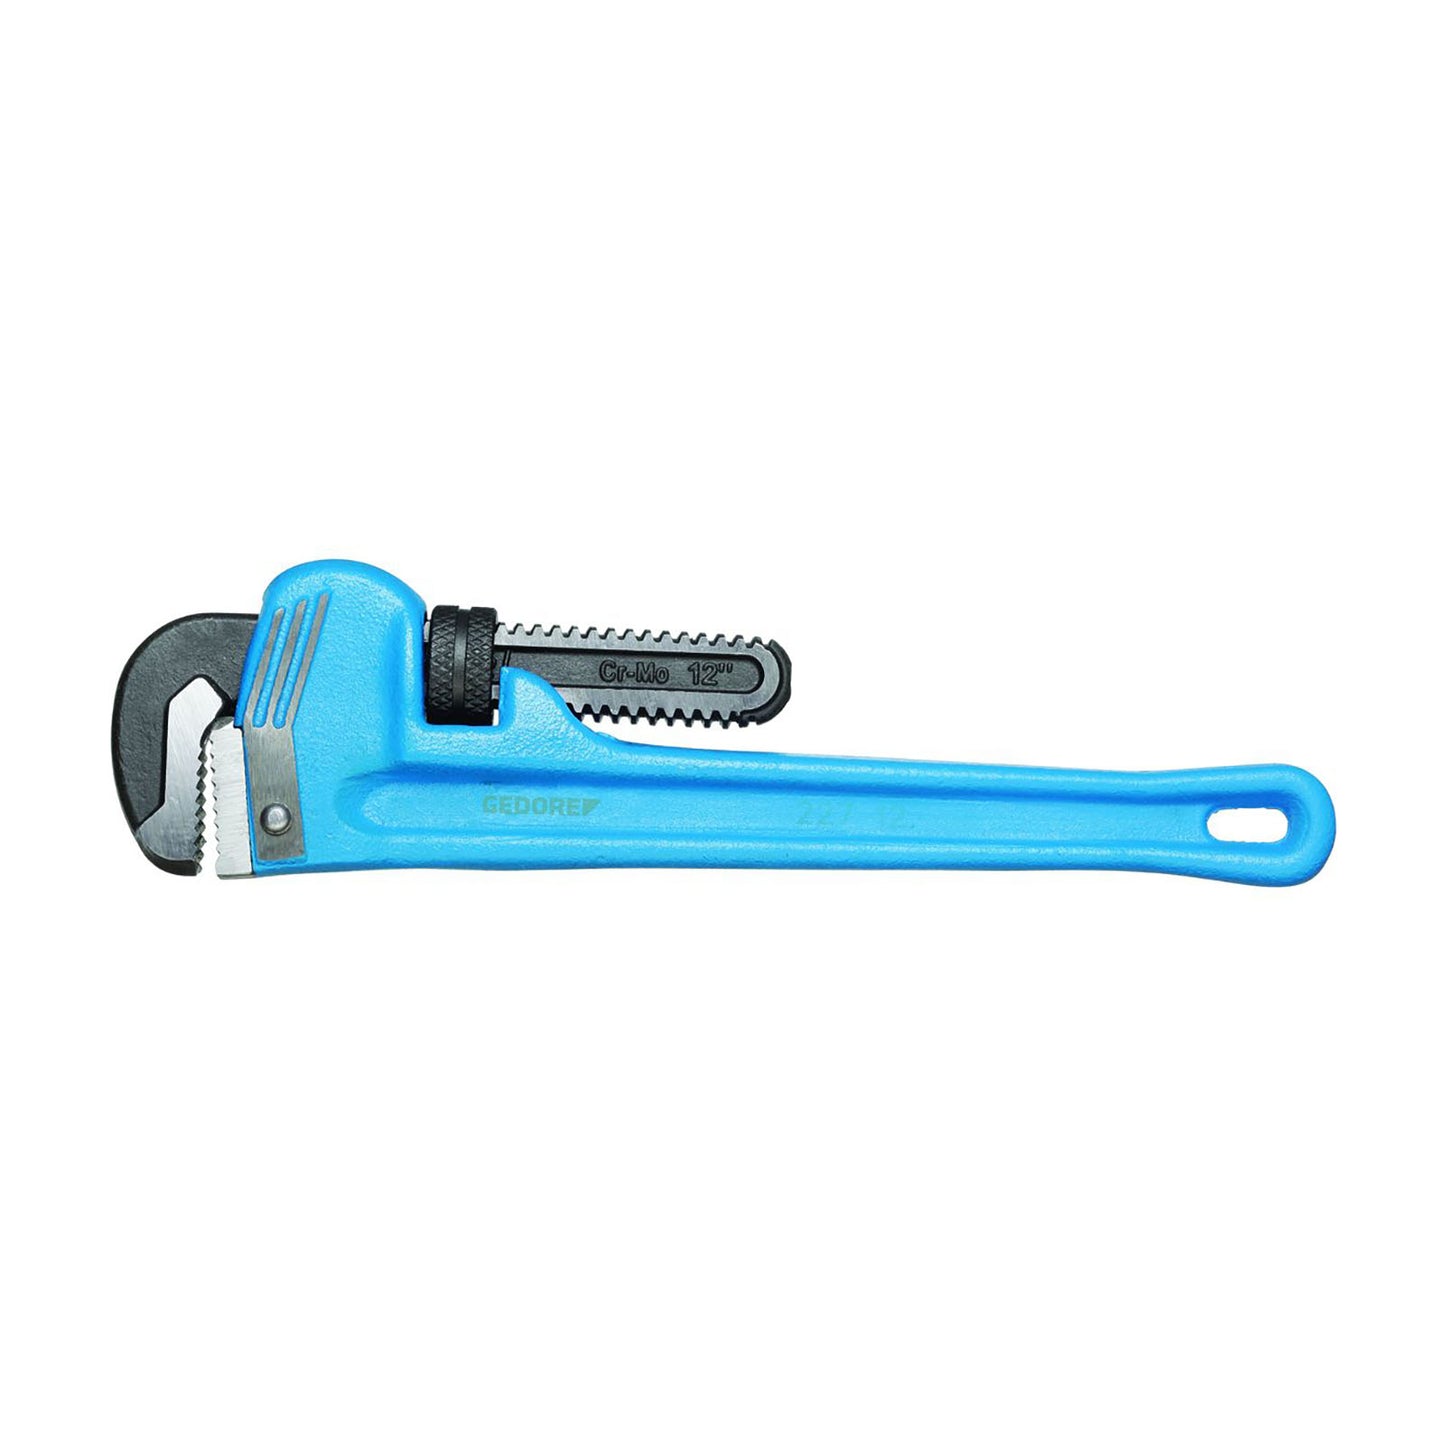 GEDORE 227 10 - Rf 227 Pipe Wrench 10 (6453110)